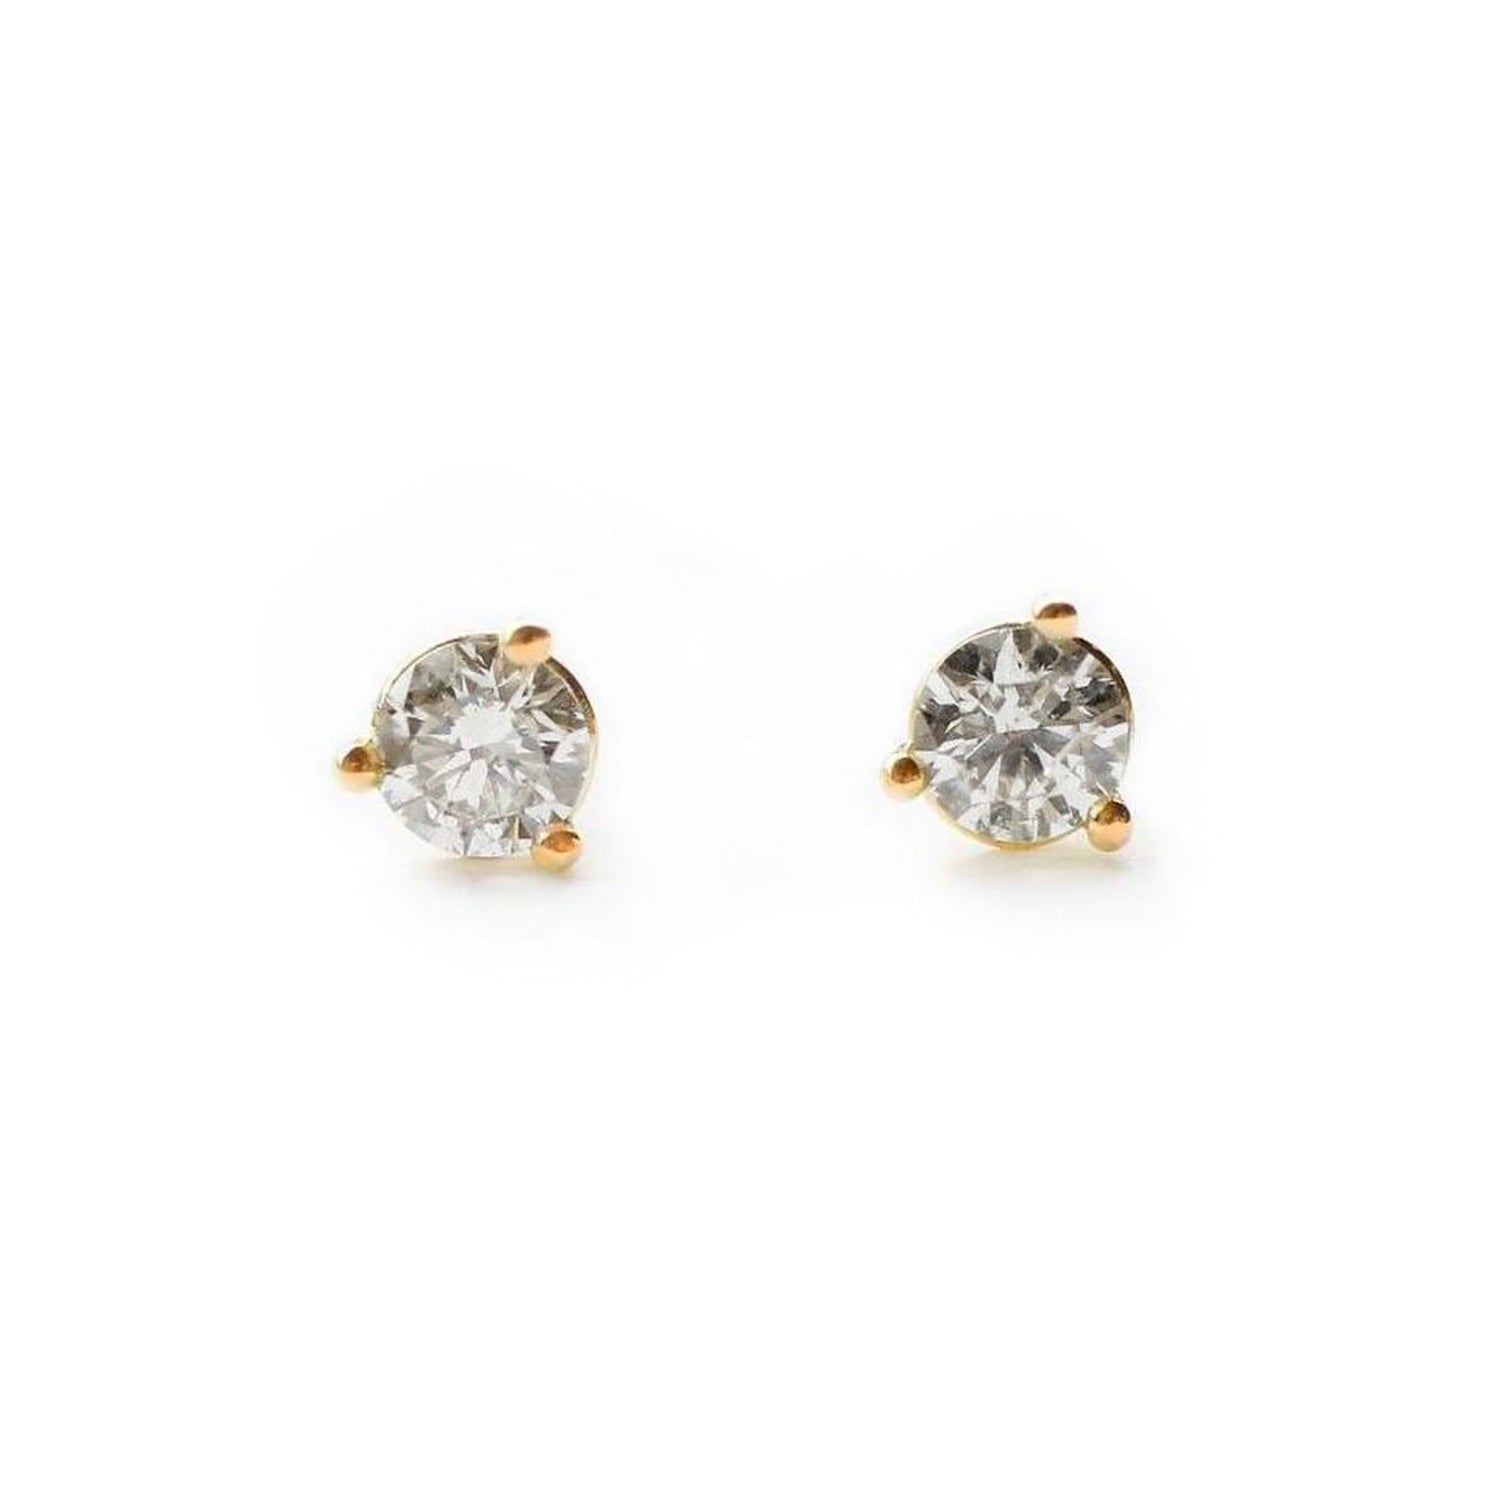 https://www.vicstonenyc.com/products/tiny-natural-diamond-3-prong-setting-white-gold-earrings